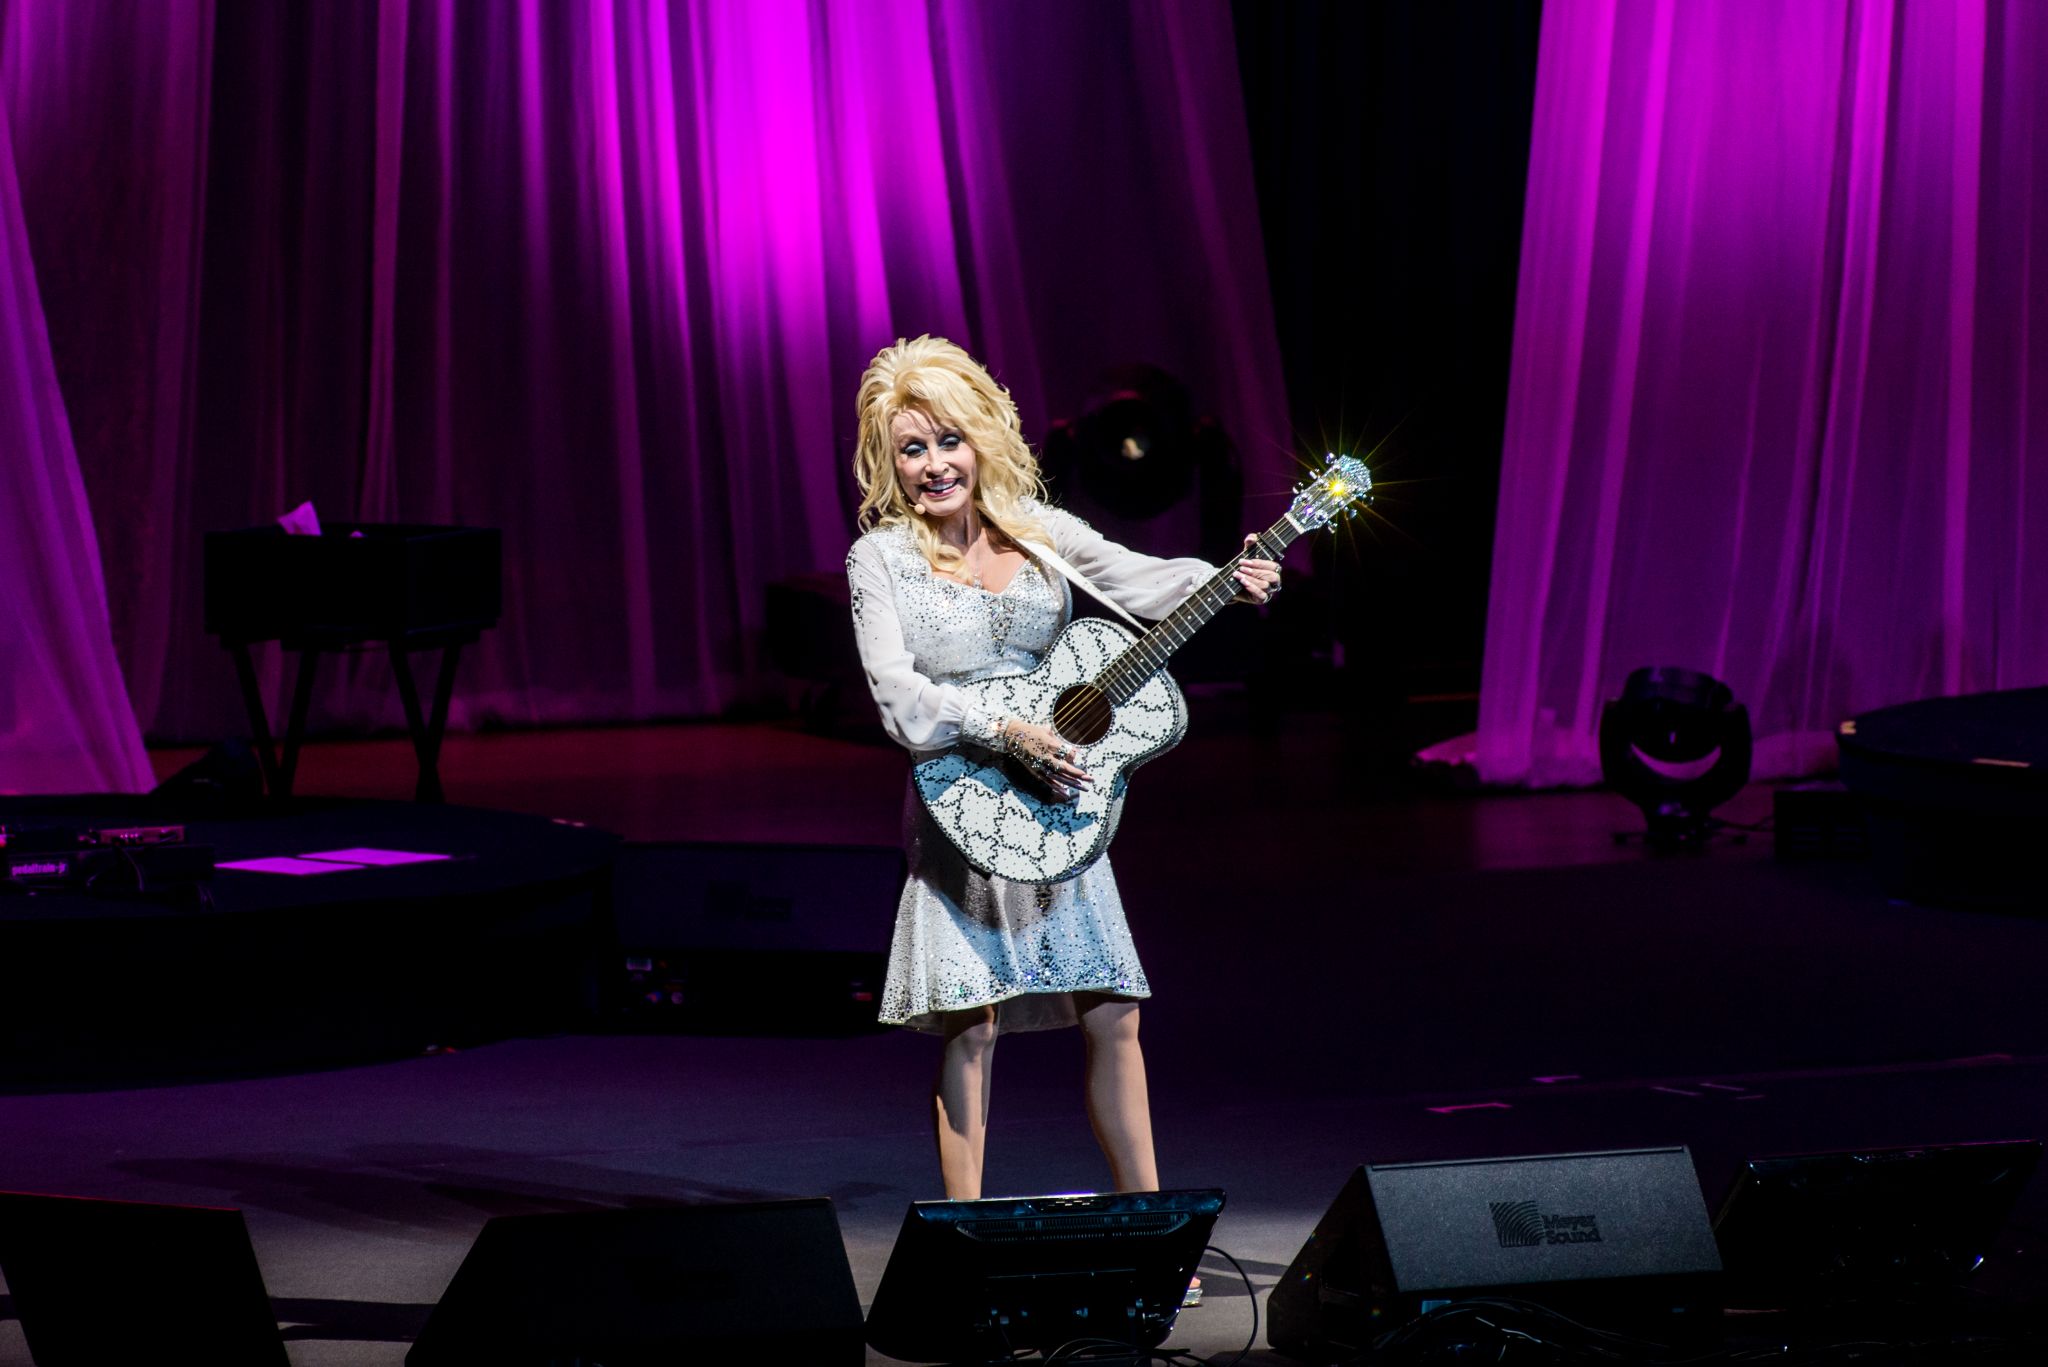 See Dolly Parton's full perform at Imagination Library of Kansas event